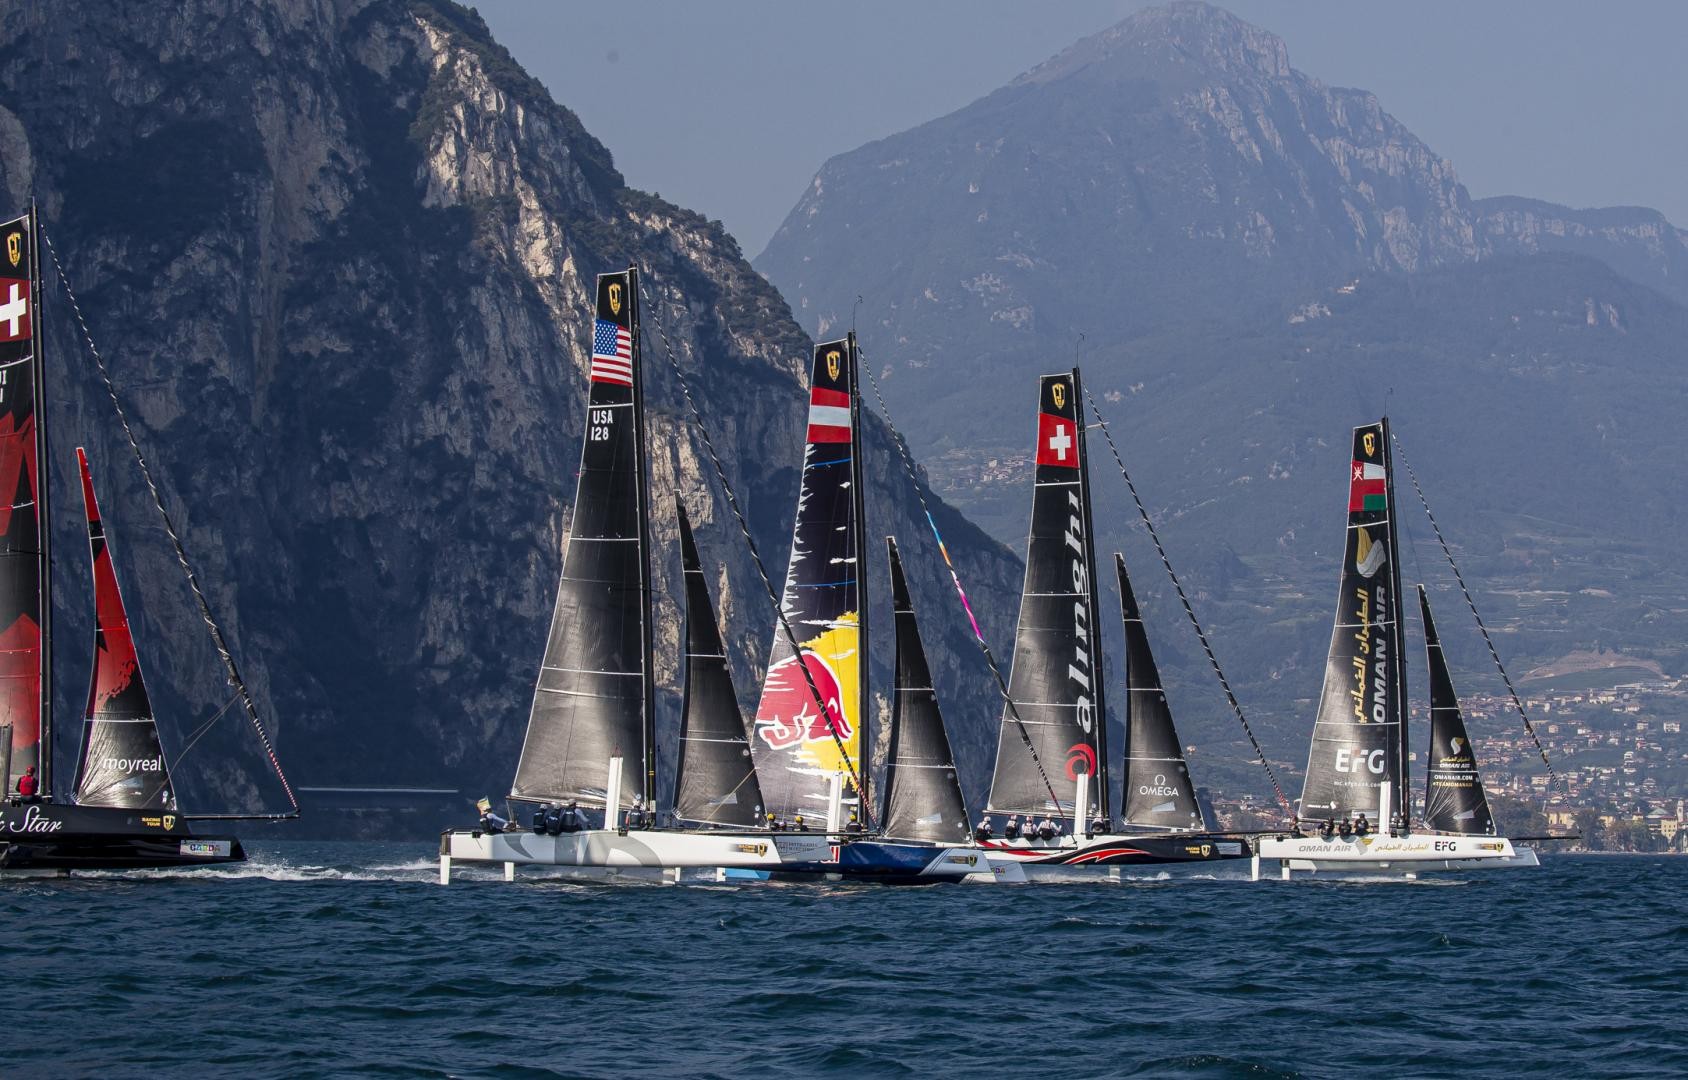 GC32 Racing Tour resumes in 2021 with new French venue